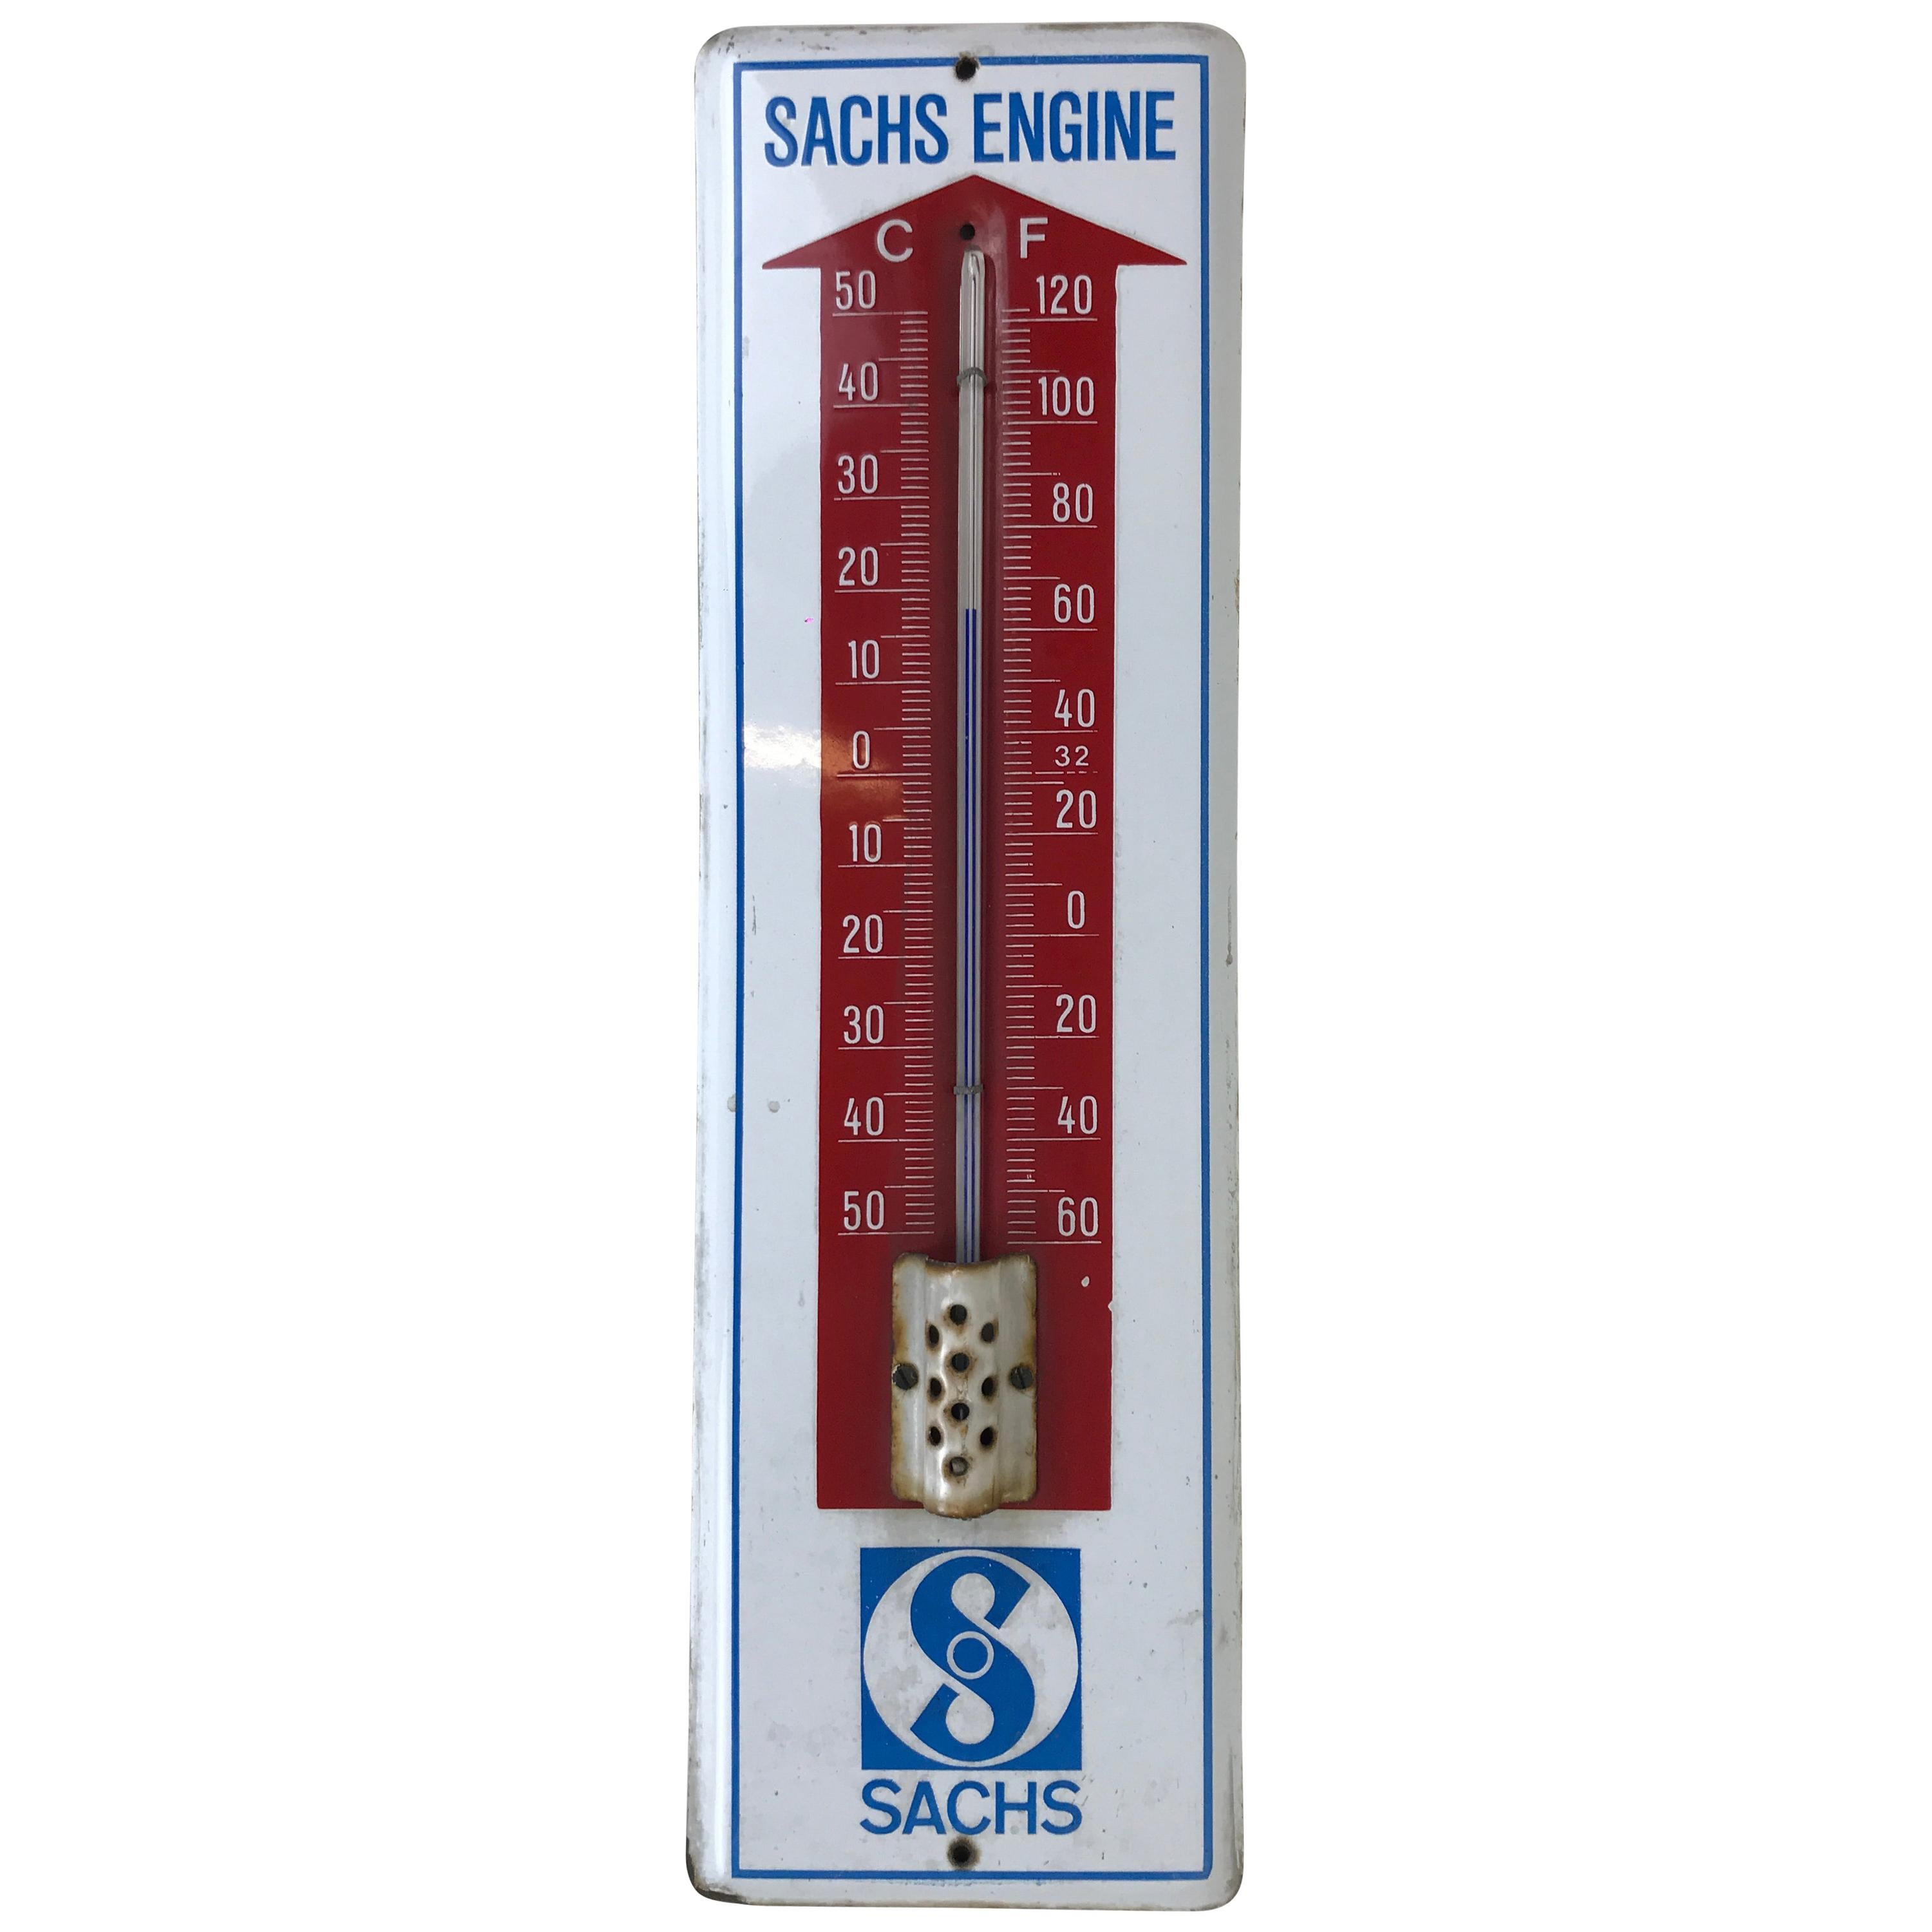 1950s Vintage Enamel Metal Advertising German Wall Thermometer by Sachs Engine For Sale